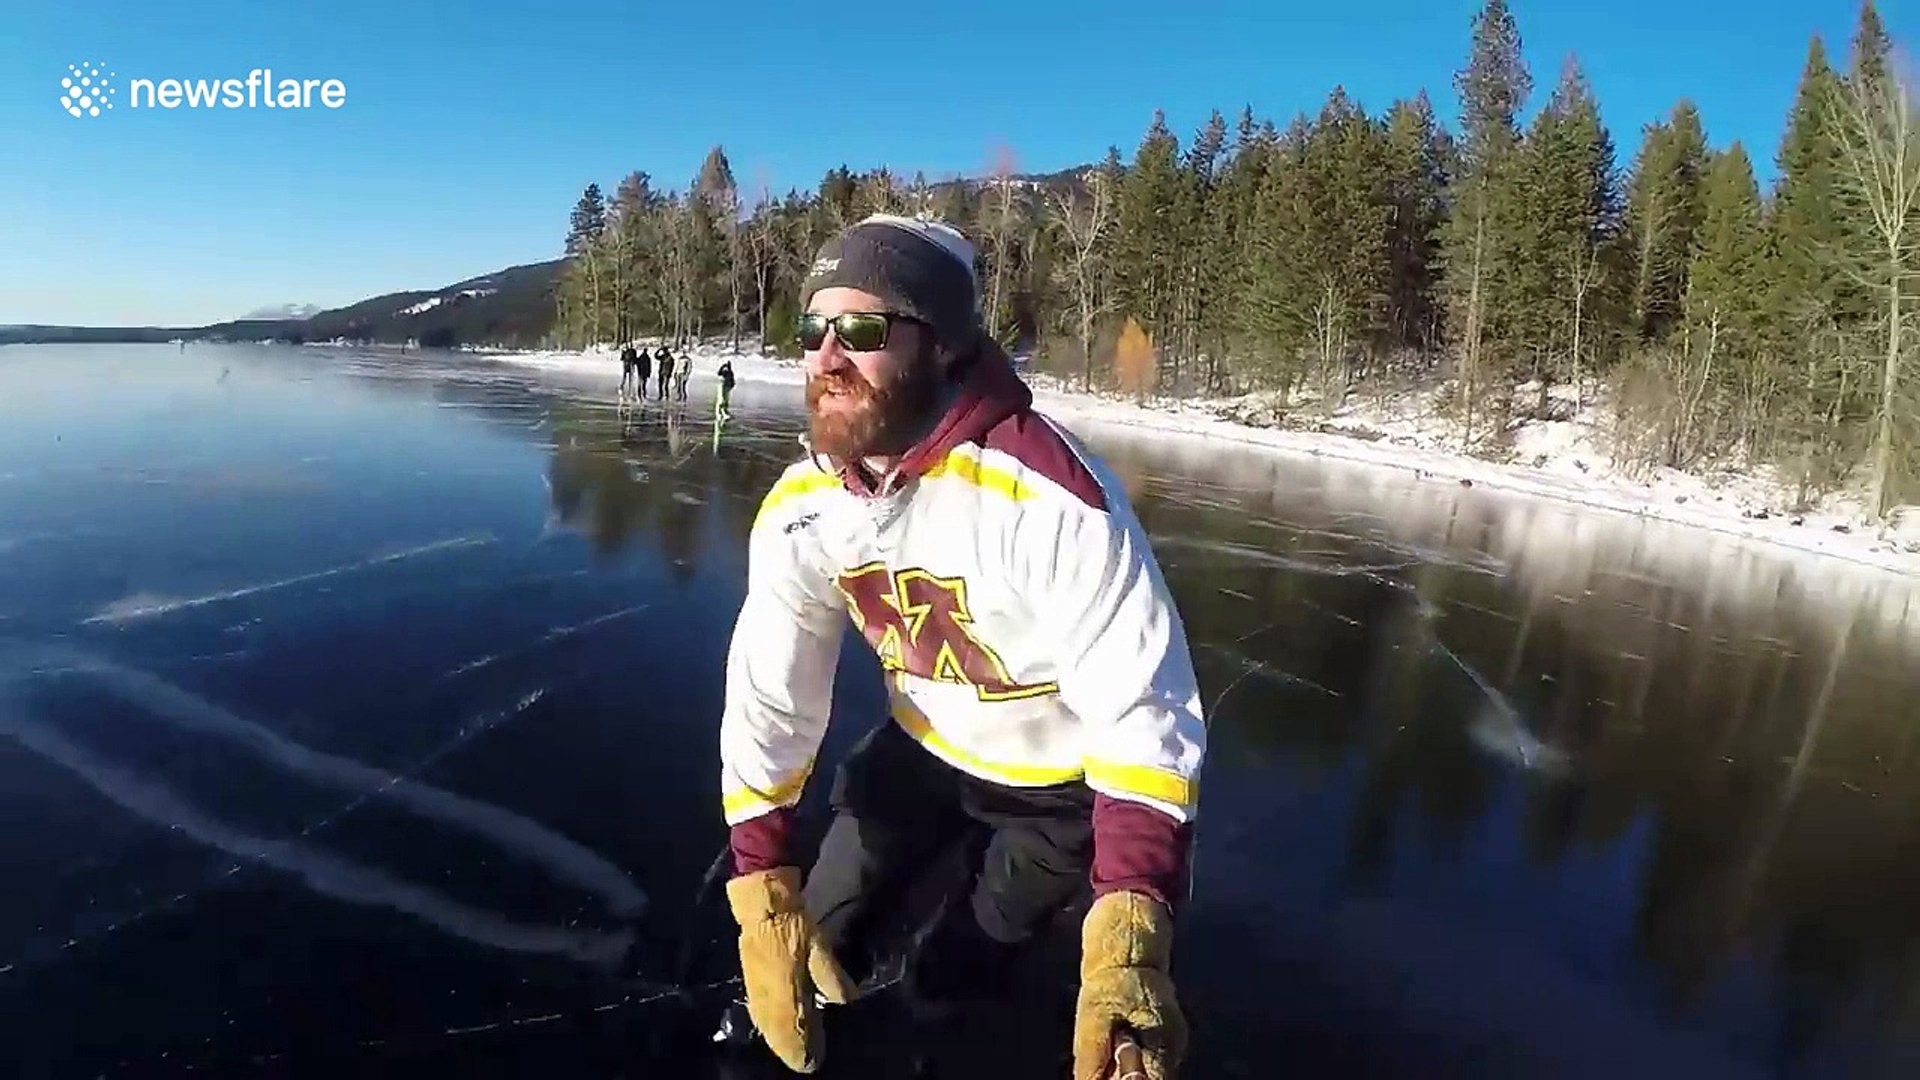 Skating on crystal-clear ice in Montana